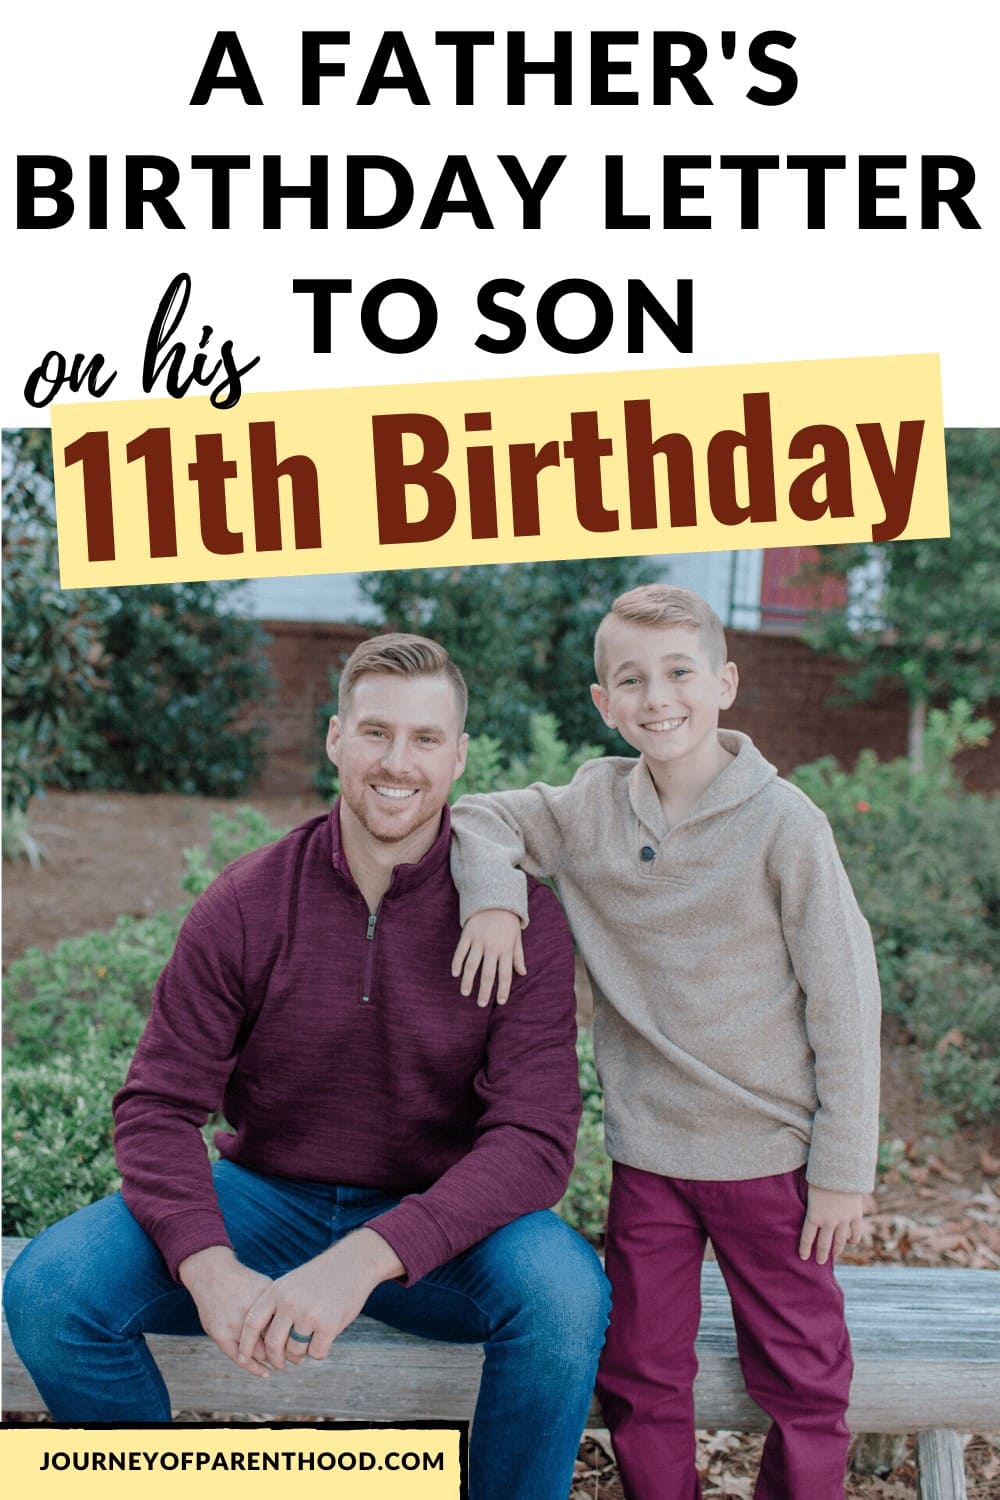 11th birthday letter to son from father